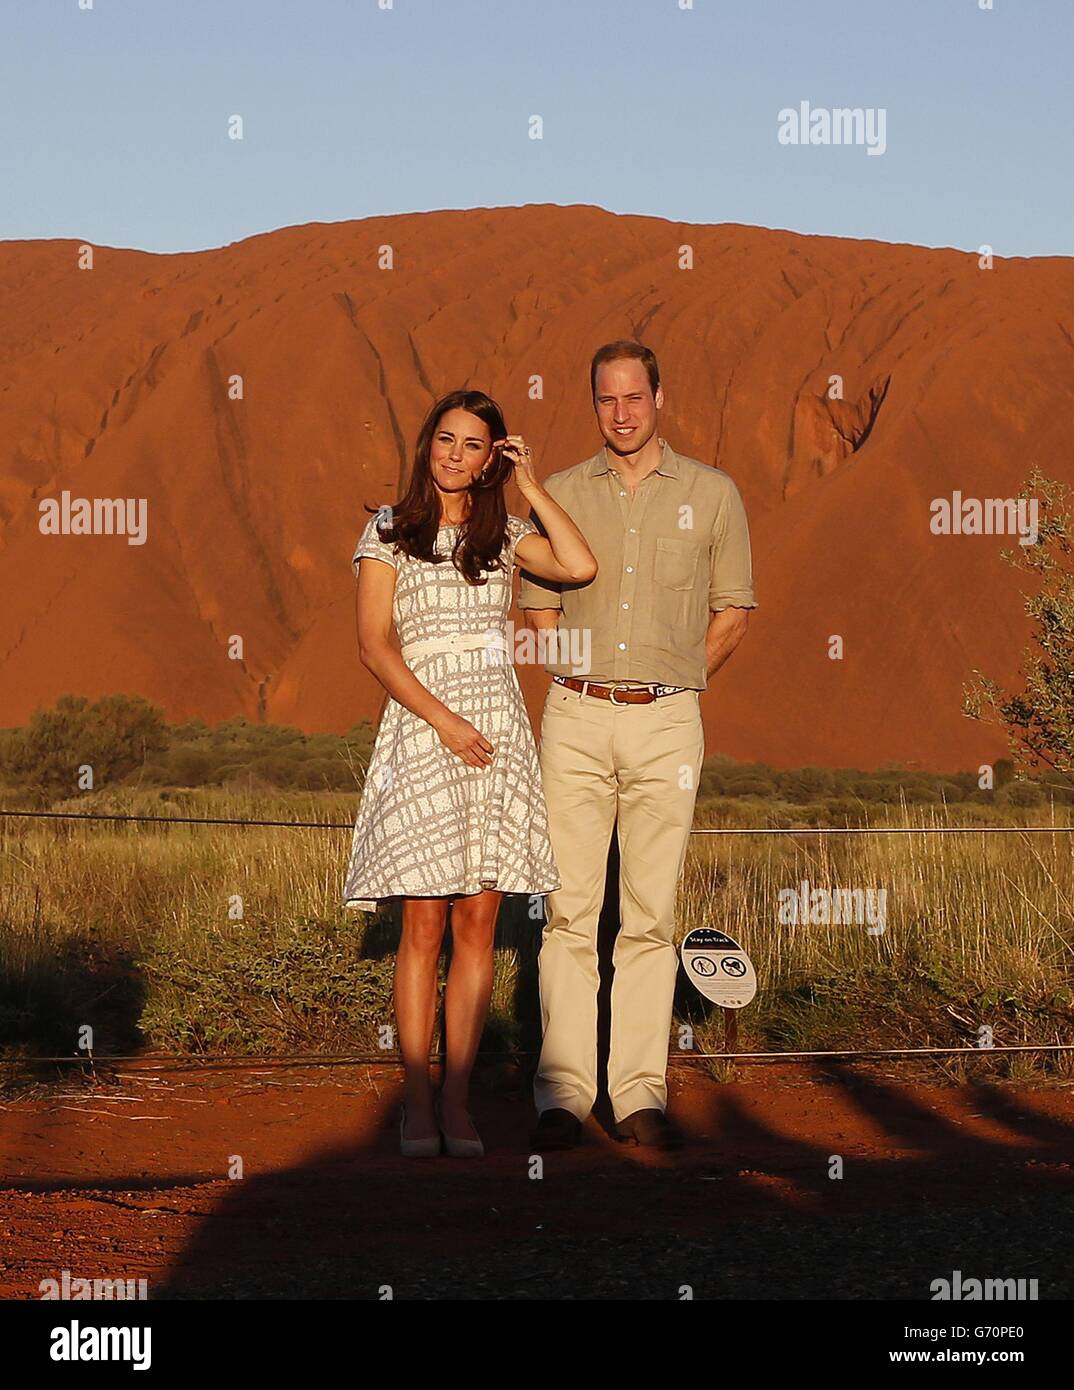 The Duke and Duchess of Cambridge pose for media with Uluru in the background during the sixteenth day of their official tour to New Zealand and Australia. Stock Photo